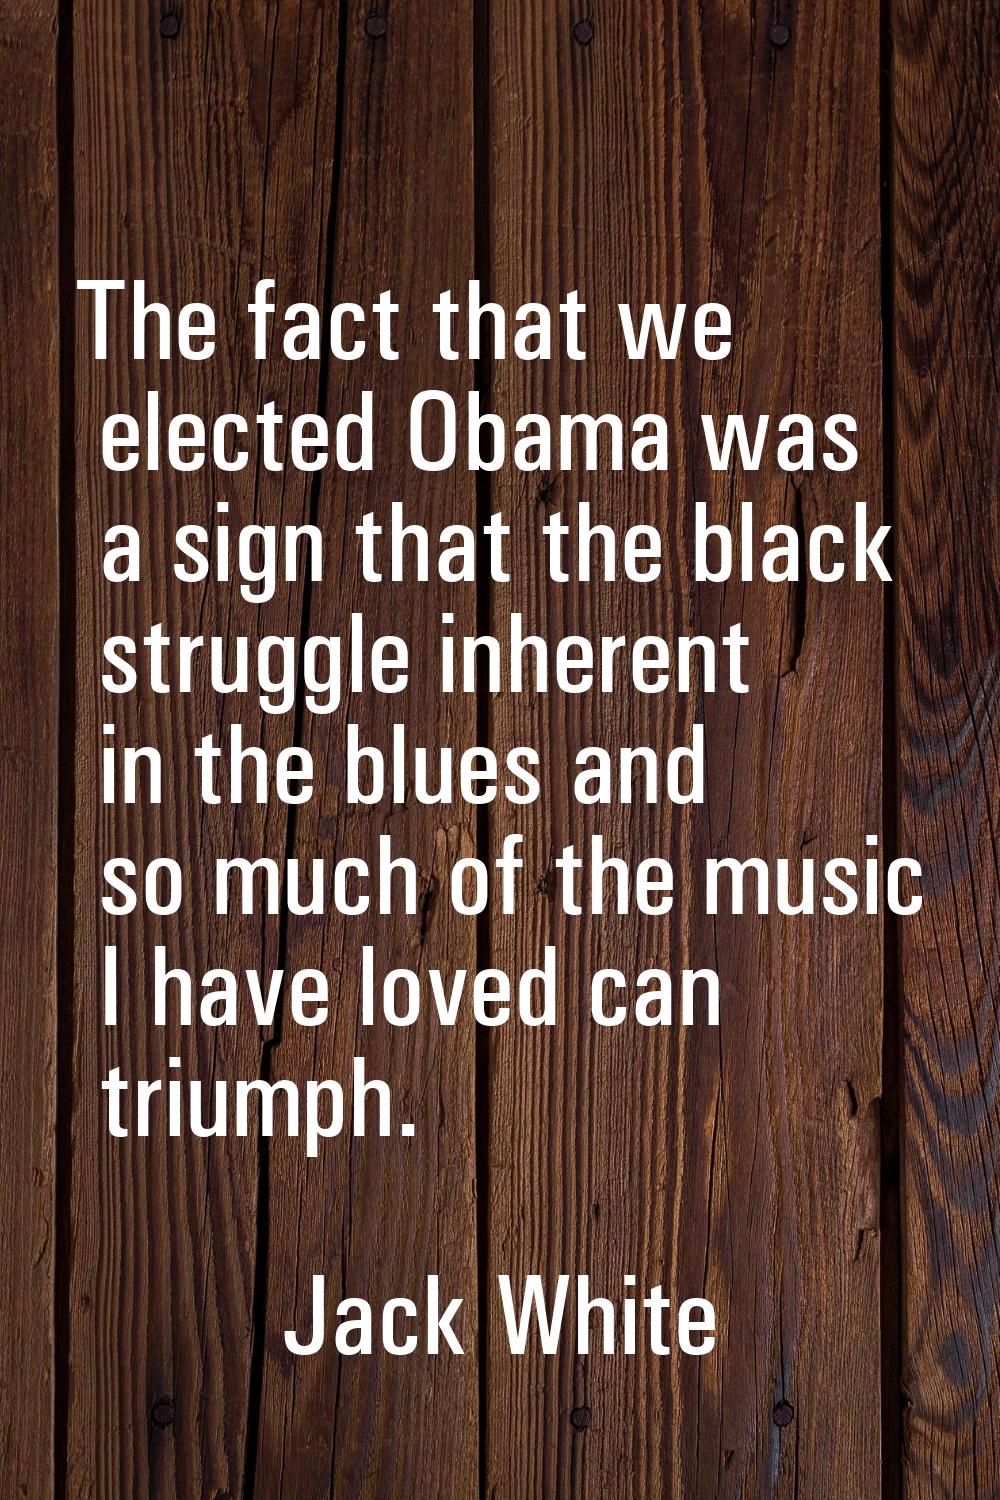 The fact that we elected Obama was a sign that the black struggle inherent in the blues and so much